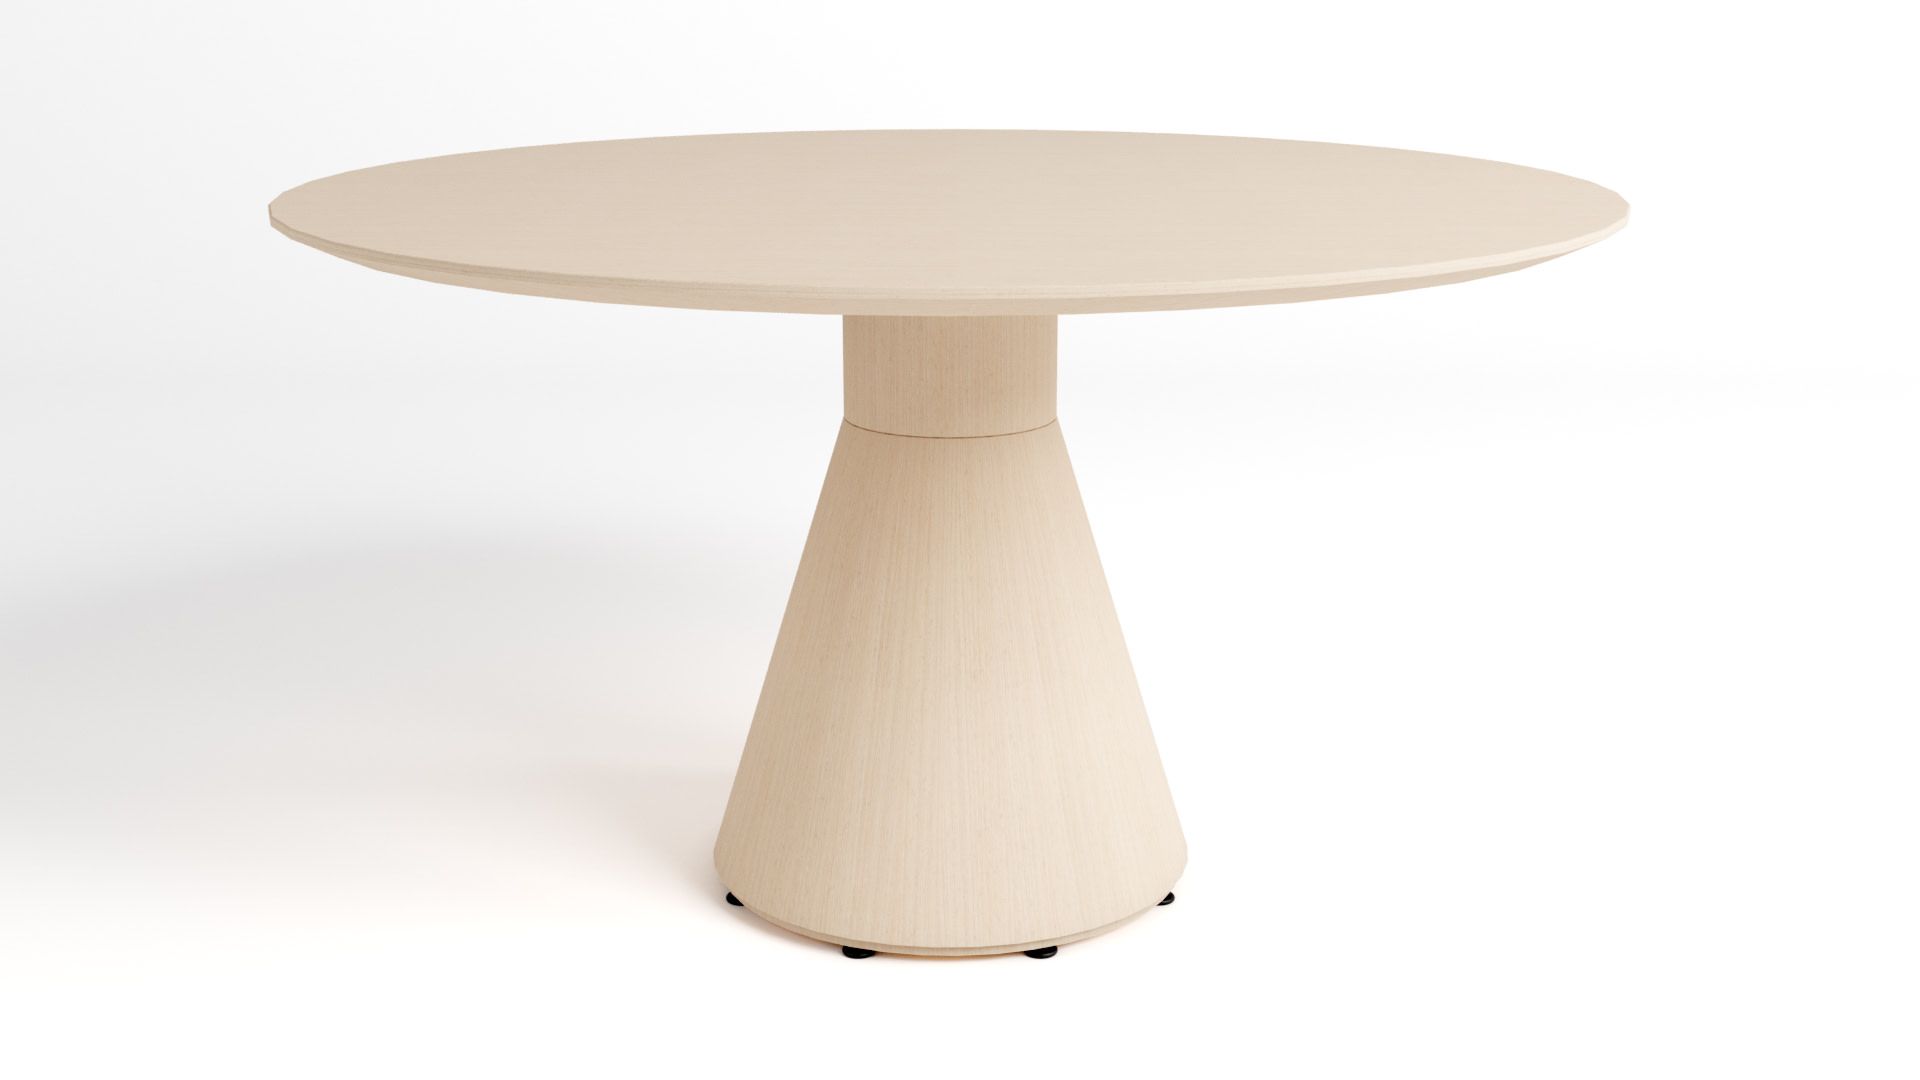 Torre Round Conference Table Intended For 2020 White T Base Seminar Coffee Tables (View 10 of 10)